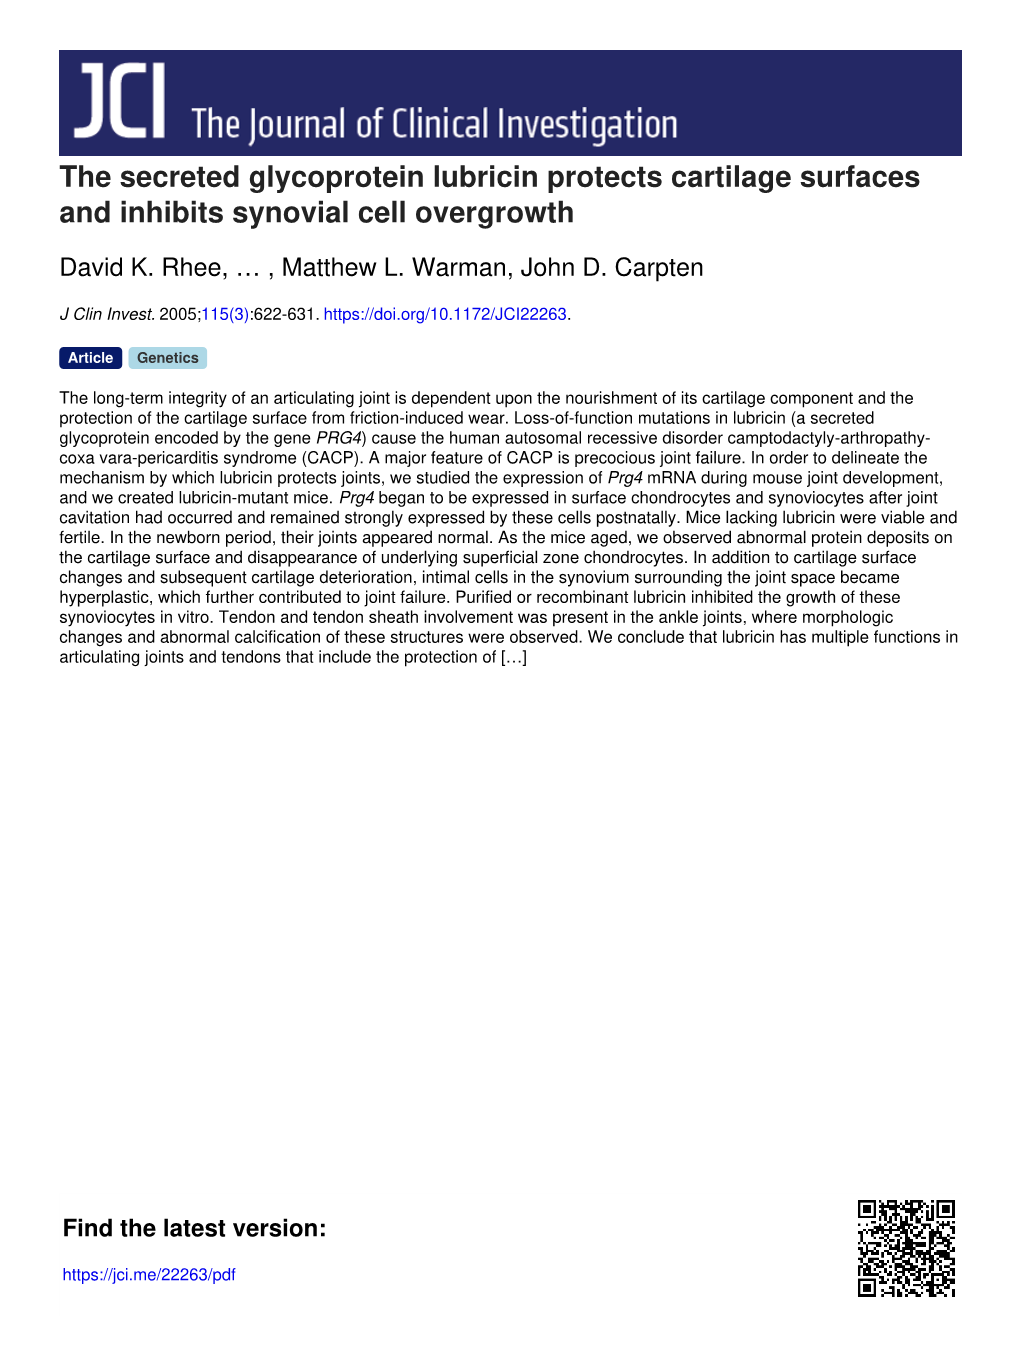 The Secreted Glycoprotein Lubricin Protects Cartilage Surfaces and Inhibits Synovial Cell Overgrowth